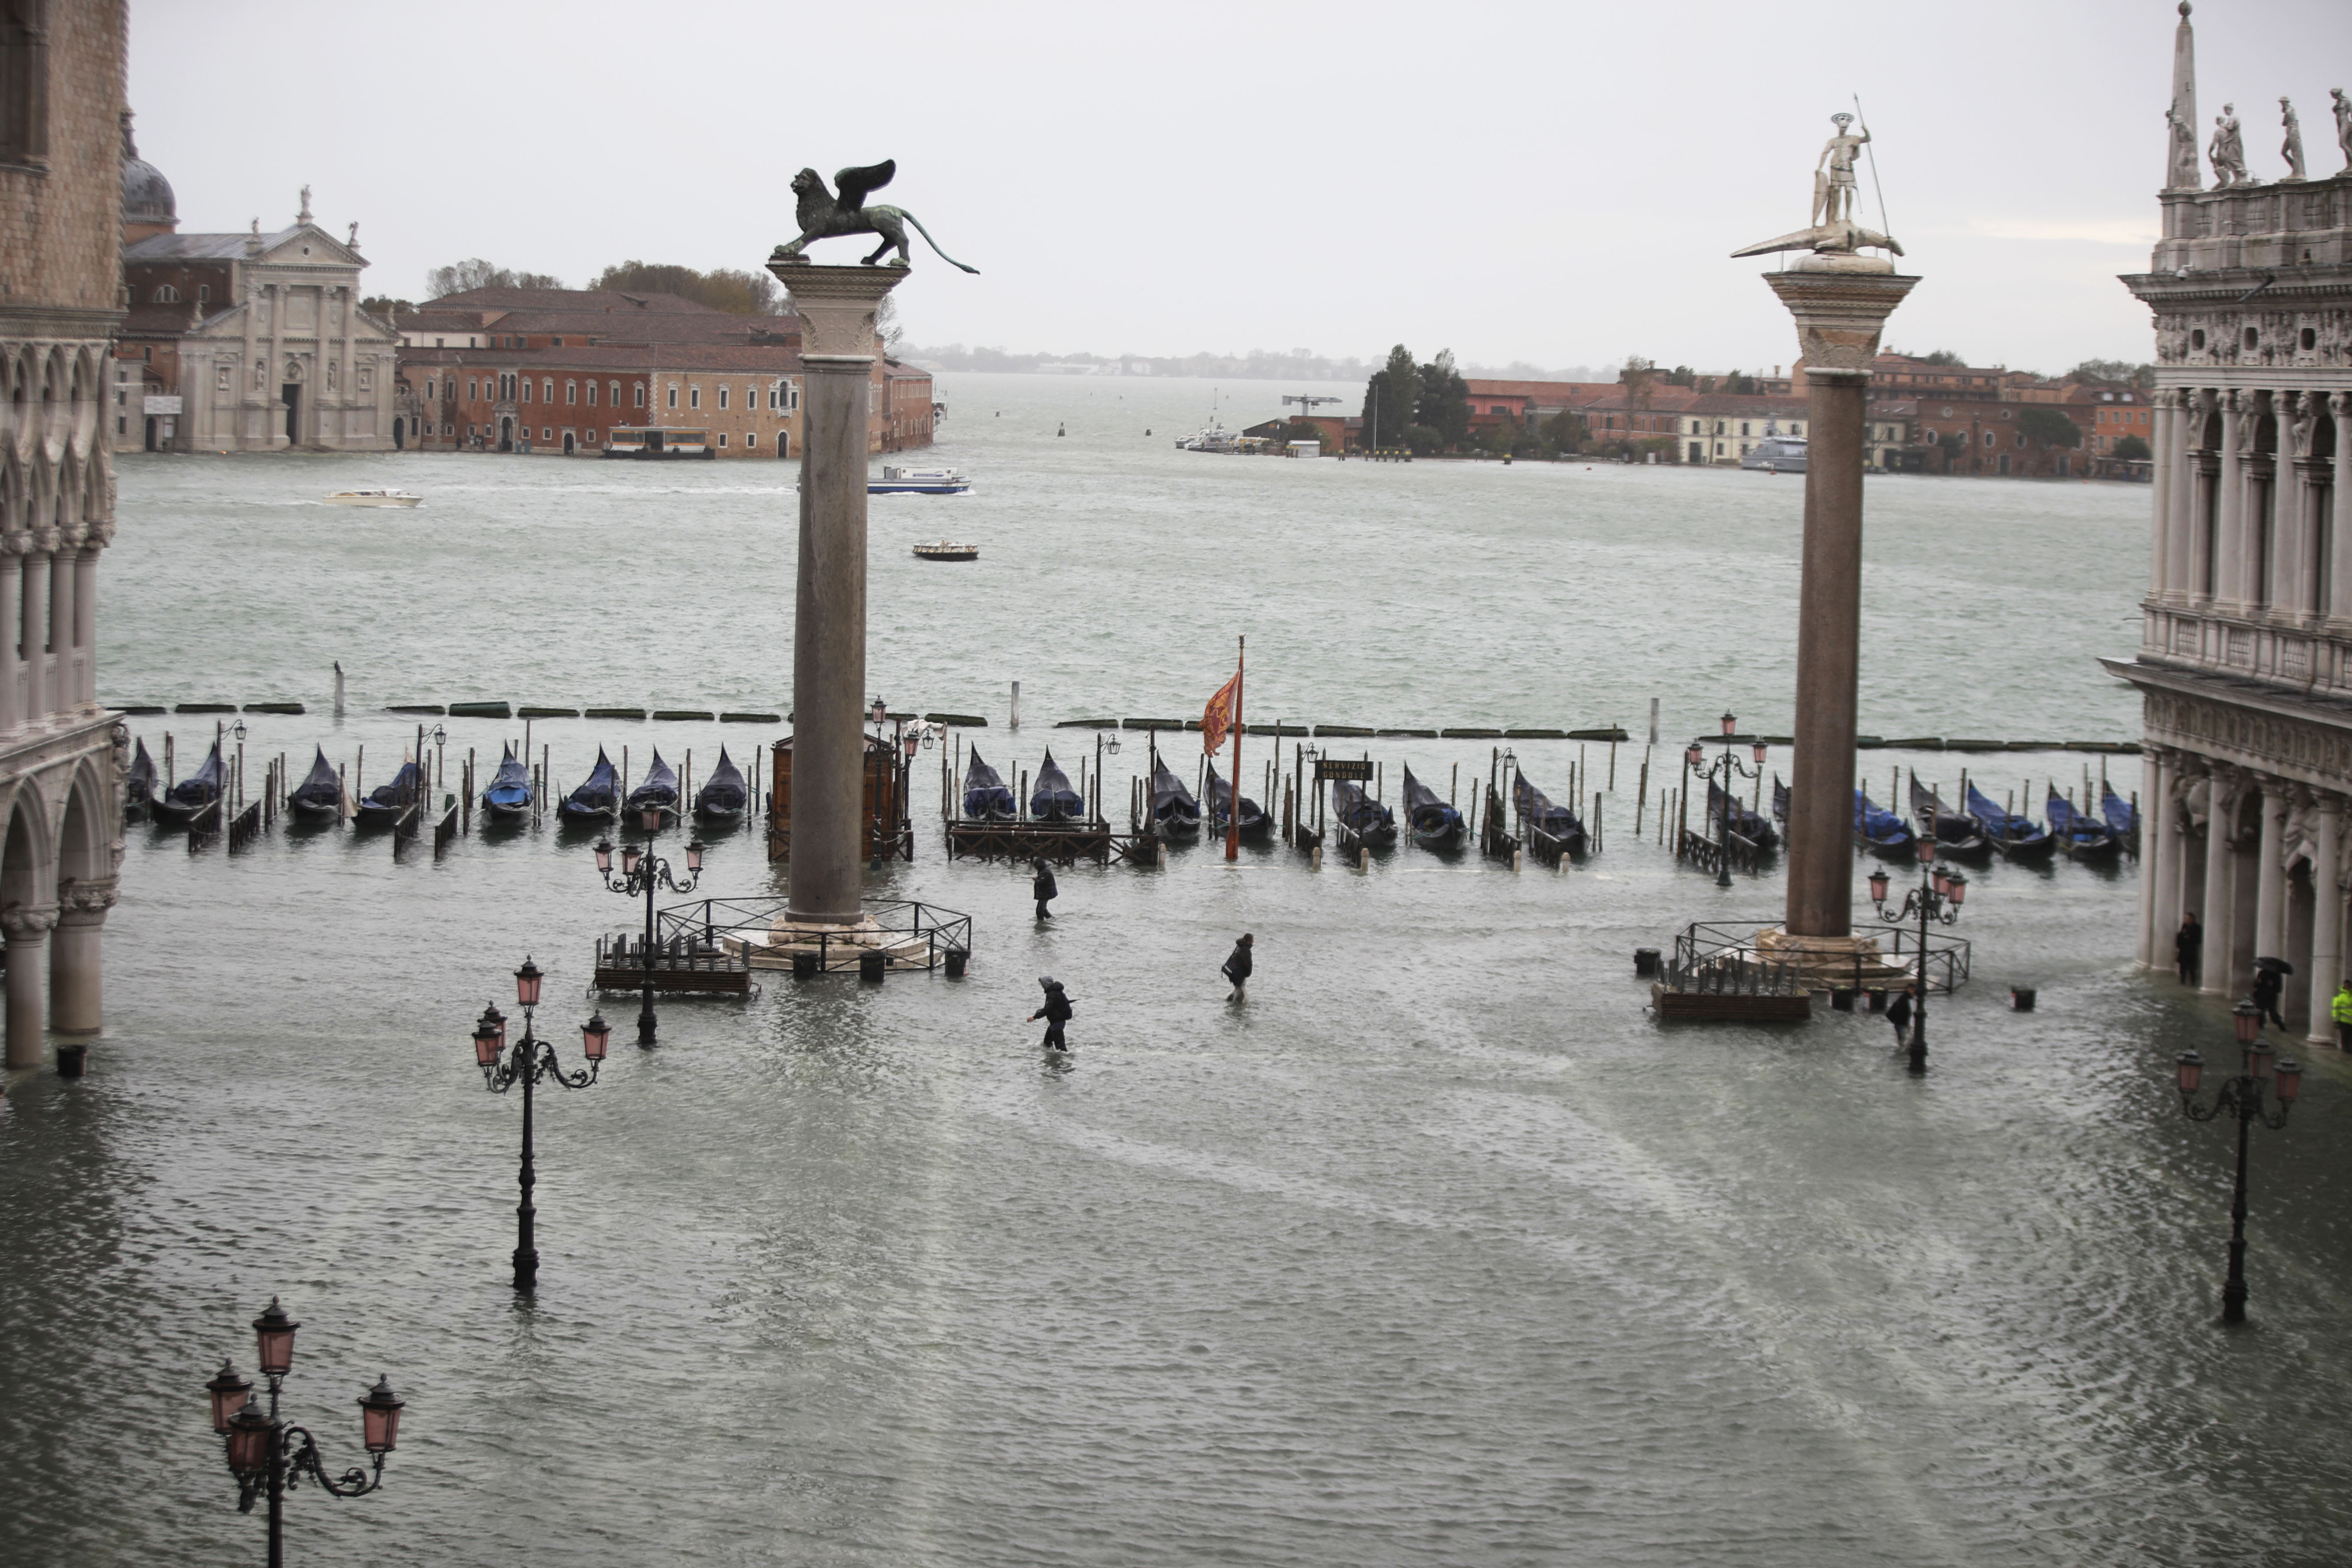 High tides surge through Venice, locals rush to protect art The Daily